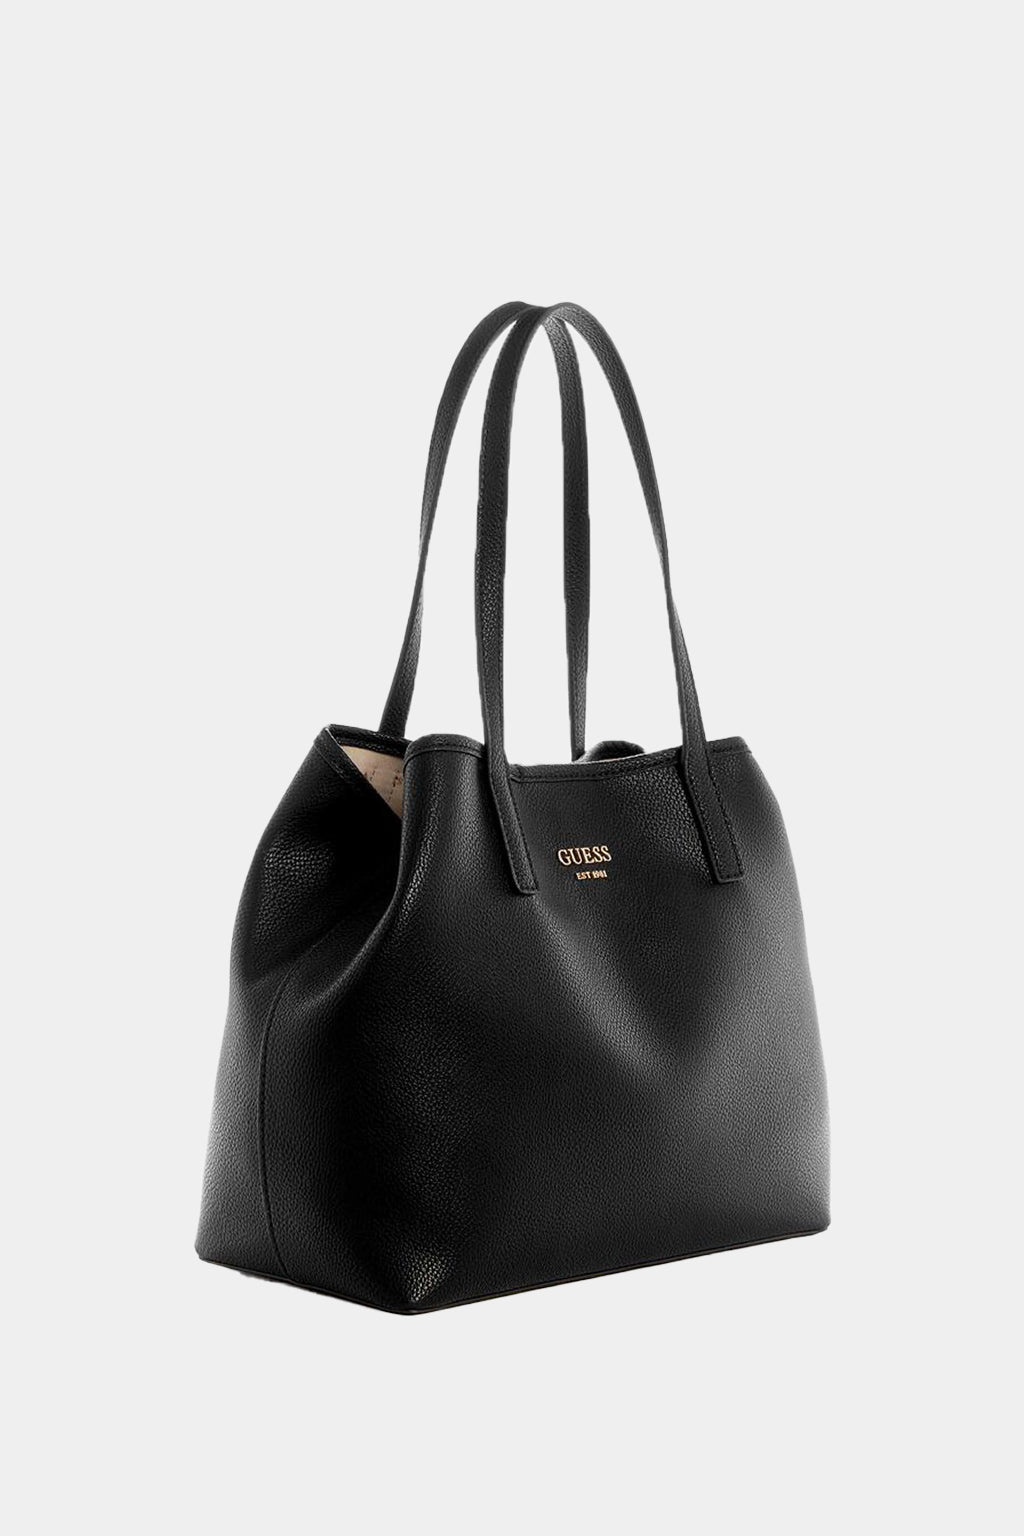 Guess - Vikky Tote